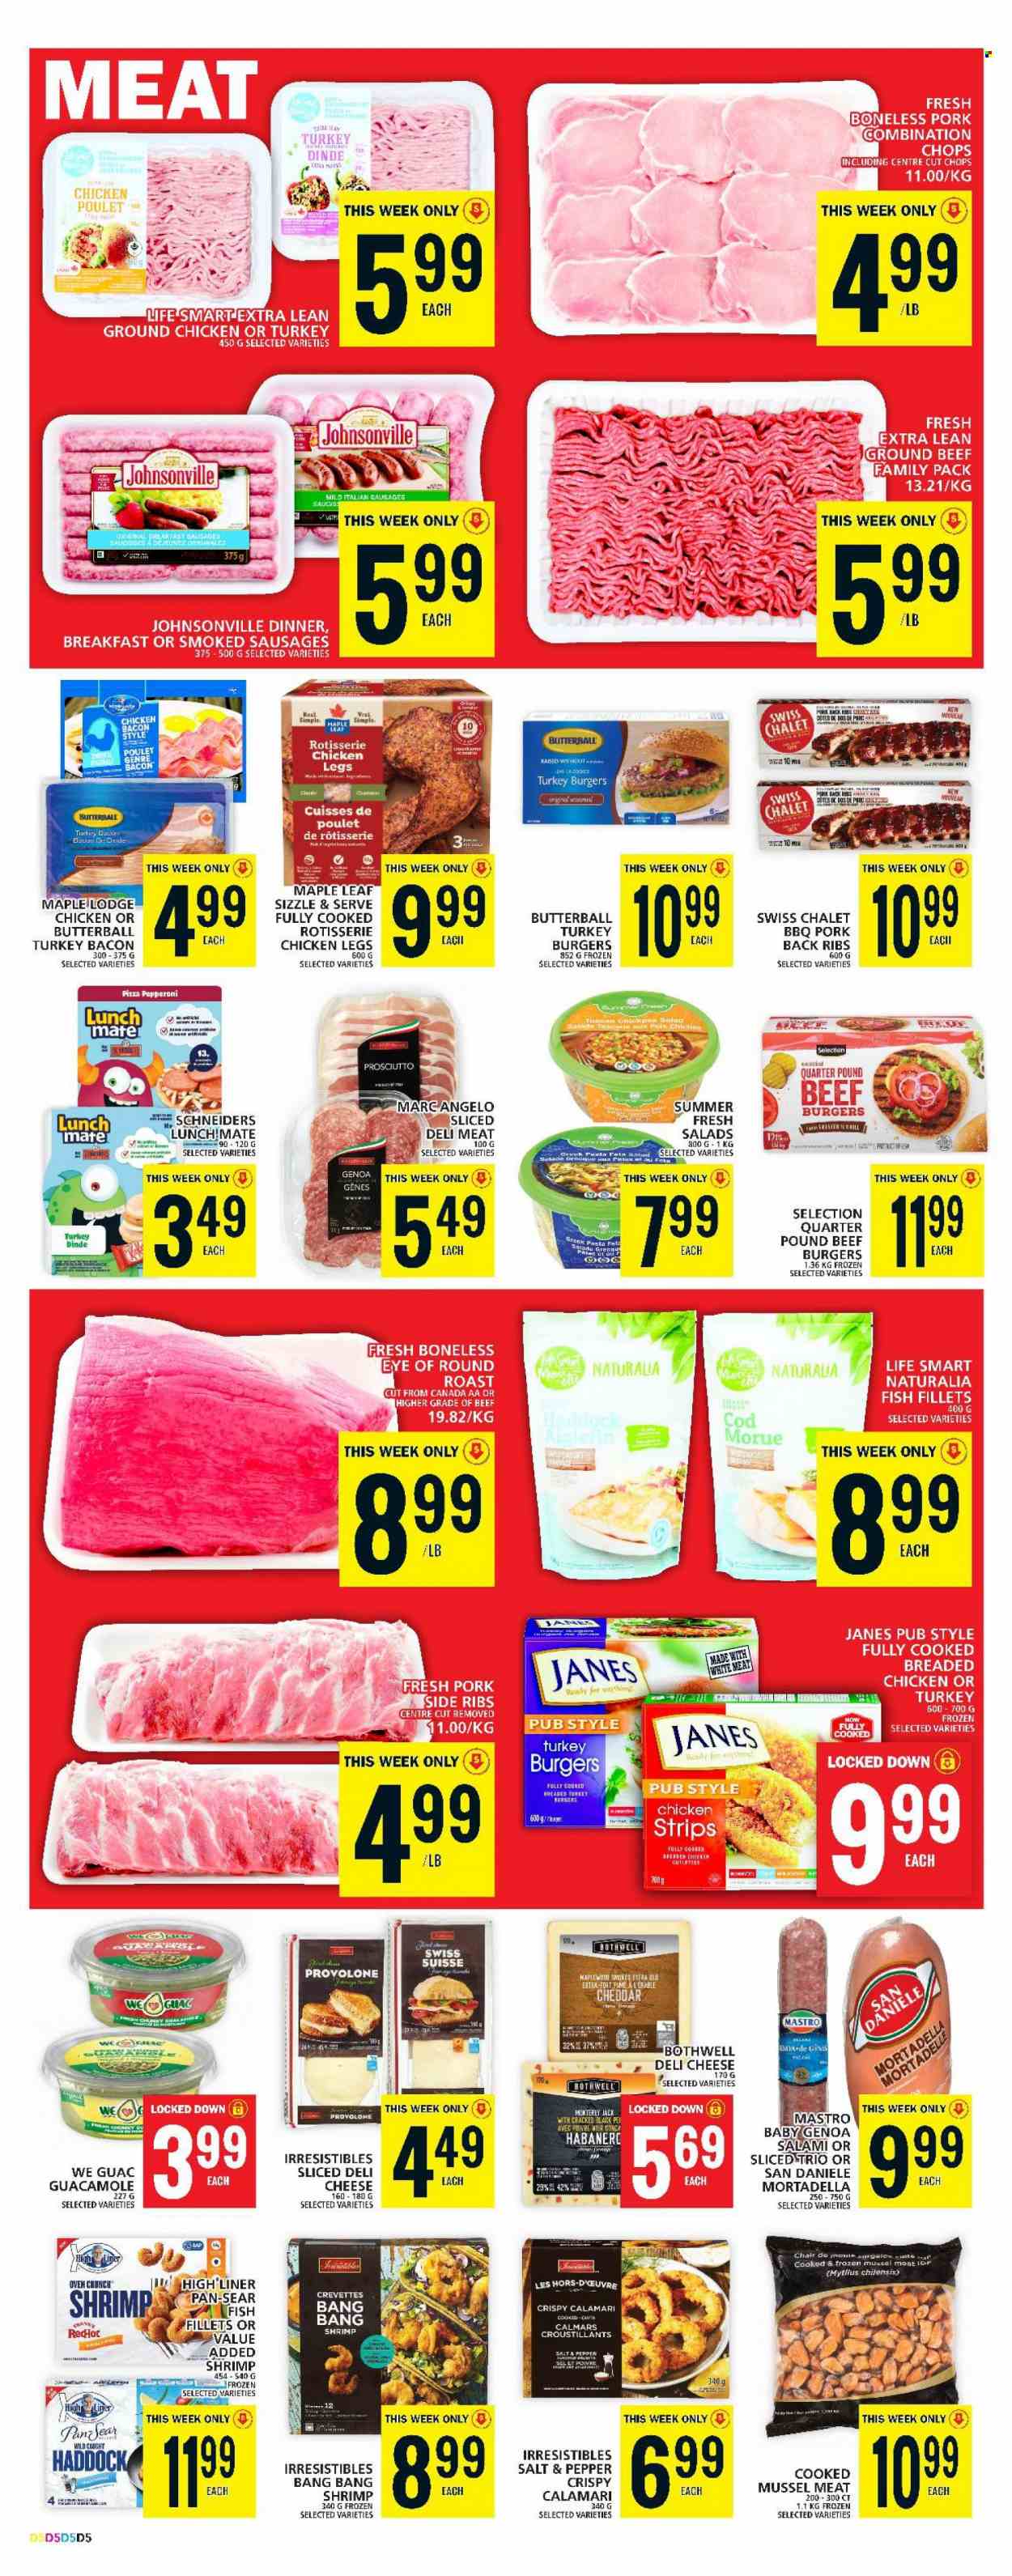 thumbnail - Food Basics Flyer - June 08, 2023 - June 14, 2023 - Sales products - salad, calamari, cod, fish fillets, mussels, haddock, fish, shrimps, pizza, chicken roast, hamburger, pasta, fried chicken, beef burger, roast, ready meal, breaded chicken, bacon, Butterball, mortadella, salami, turkey bacon, prosciutto, Johnsonville, sausage, guacamole, Monterey Jack cheese, cheddar, cheese, Provolone, strips, chicken strips, potato fries, Celeste, red wine, wine, ground chicken, chicken legs, beef meat, ground beef, eye of round, round roast, ribs, turkey burger, pork meat, pork ribs, pork back ribs, pan, paper. Page 5.